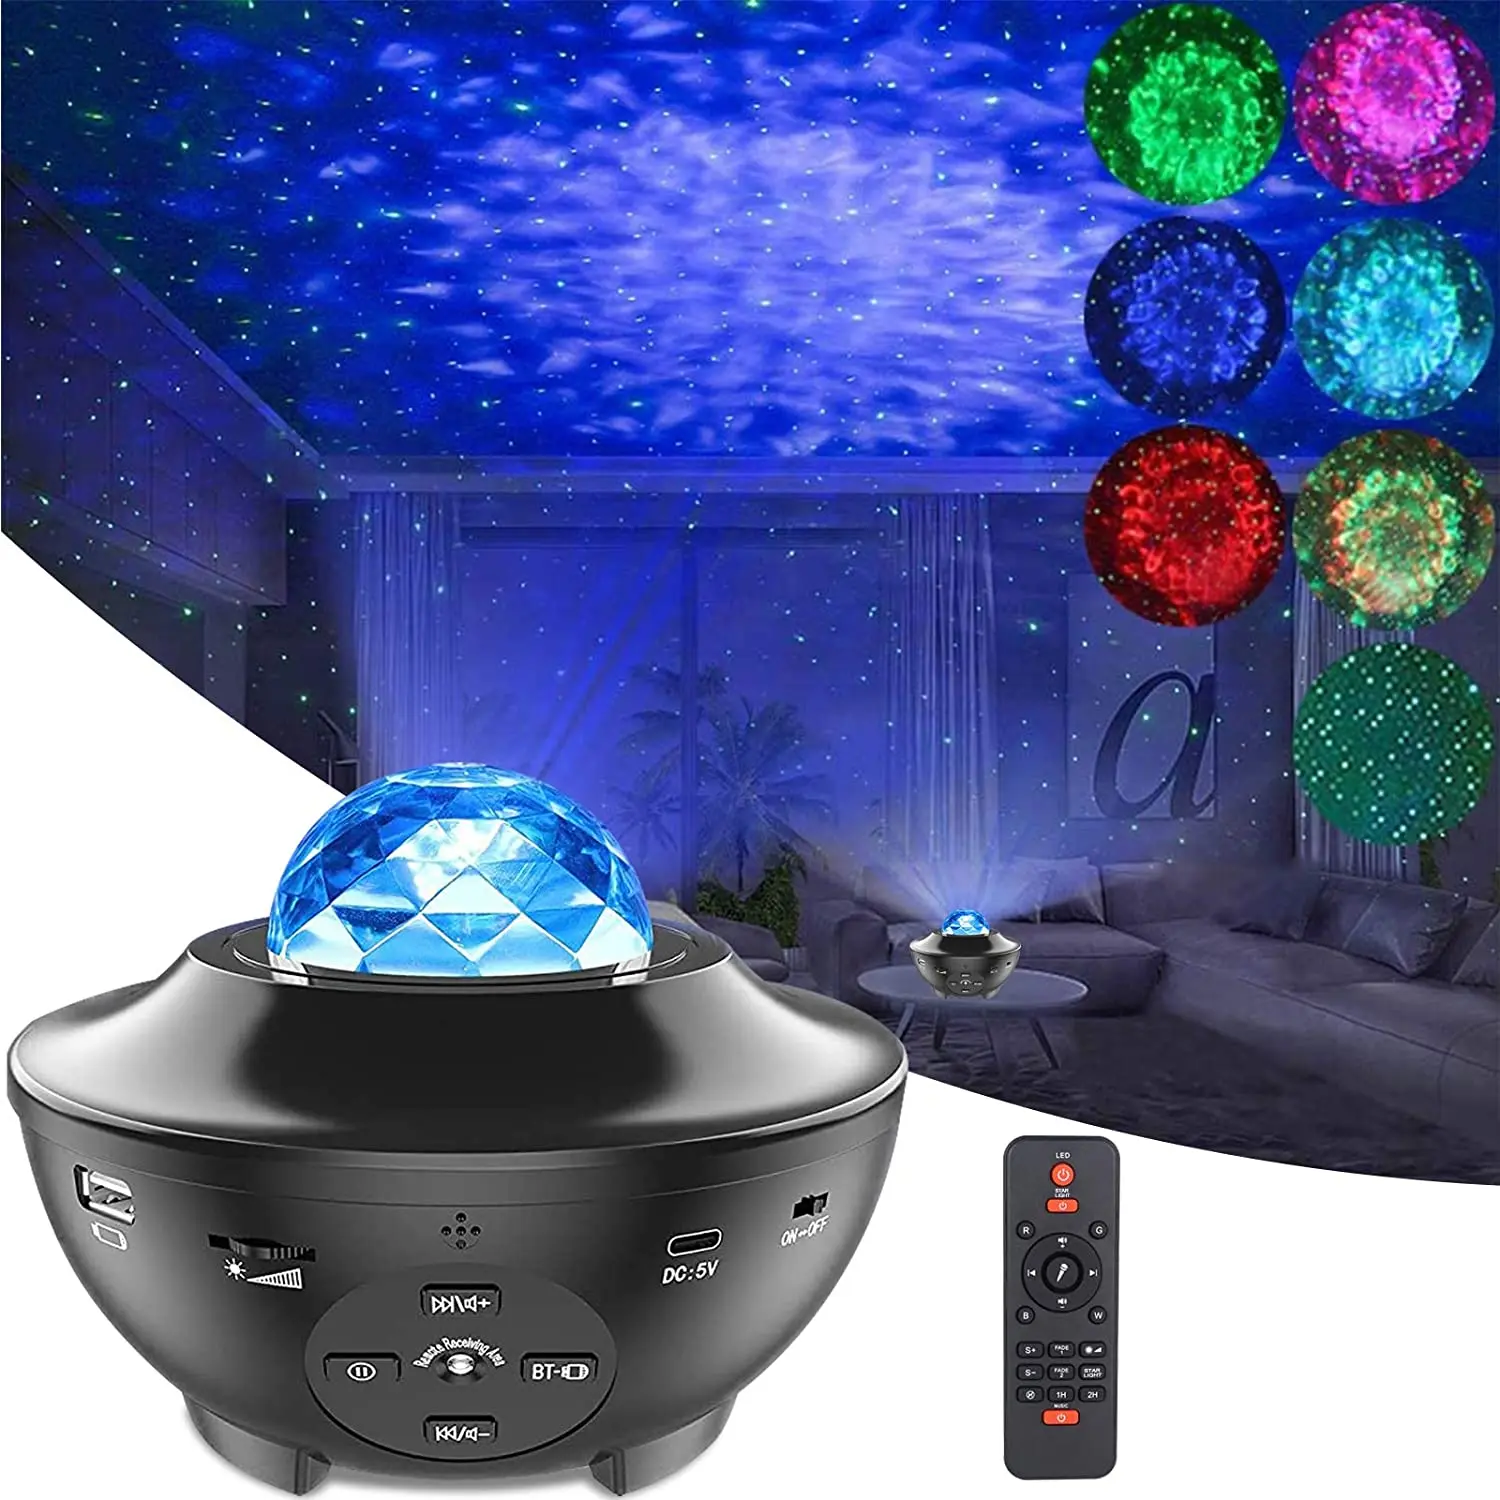 Wholesale Hot Sale Starry Sky Projector LED Wave Light Projector, Relaxation, Night Light for Christmas Gift m.alibaba.com